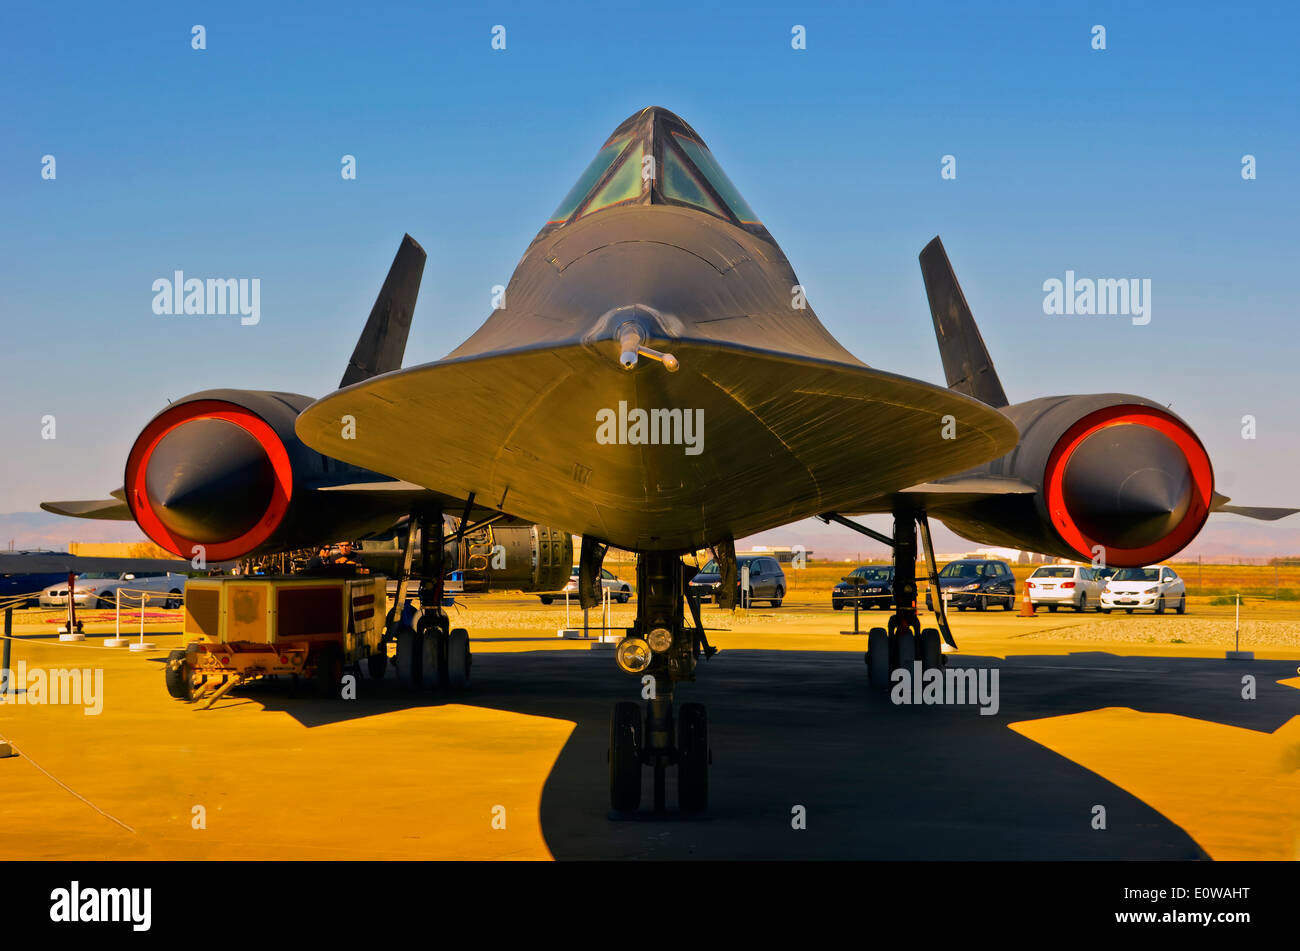 Lockheed A-12 'Blackbird aircraft. It was used in covert operations by the CIA in the 1960's. Stock Photo